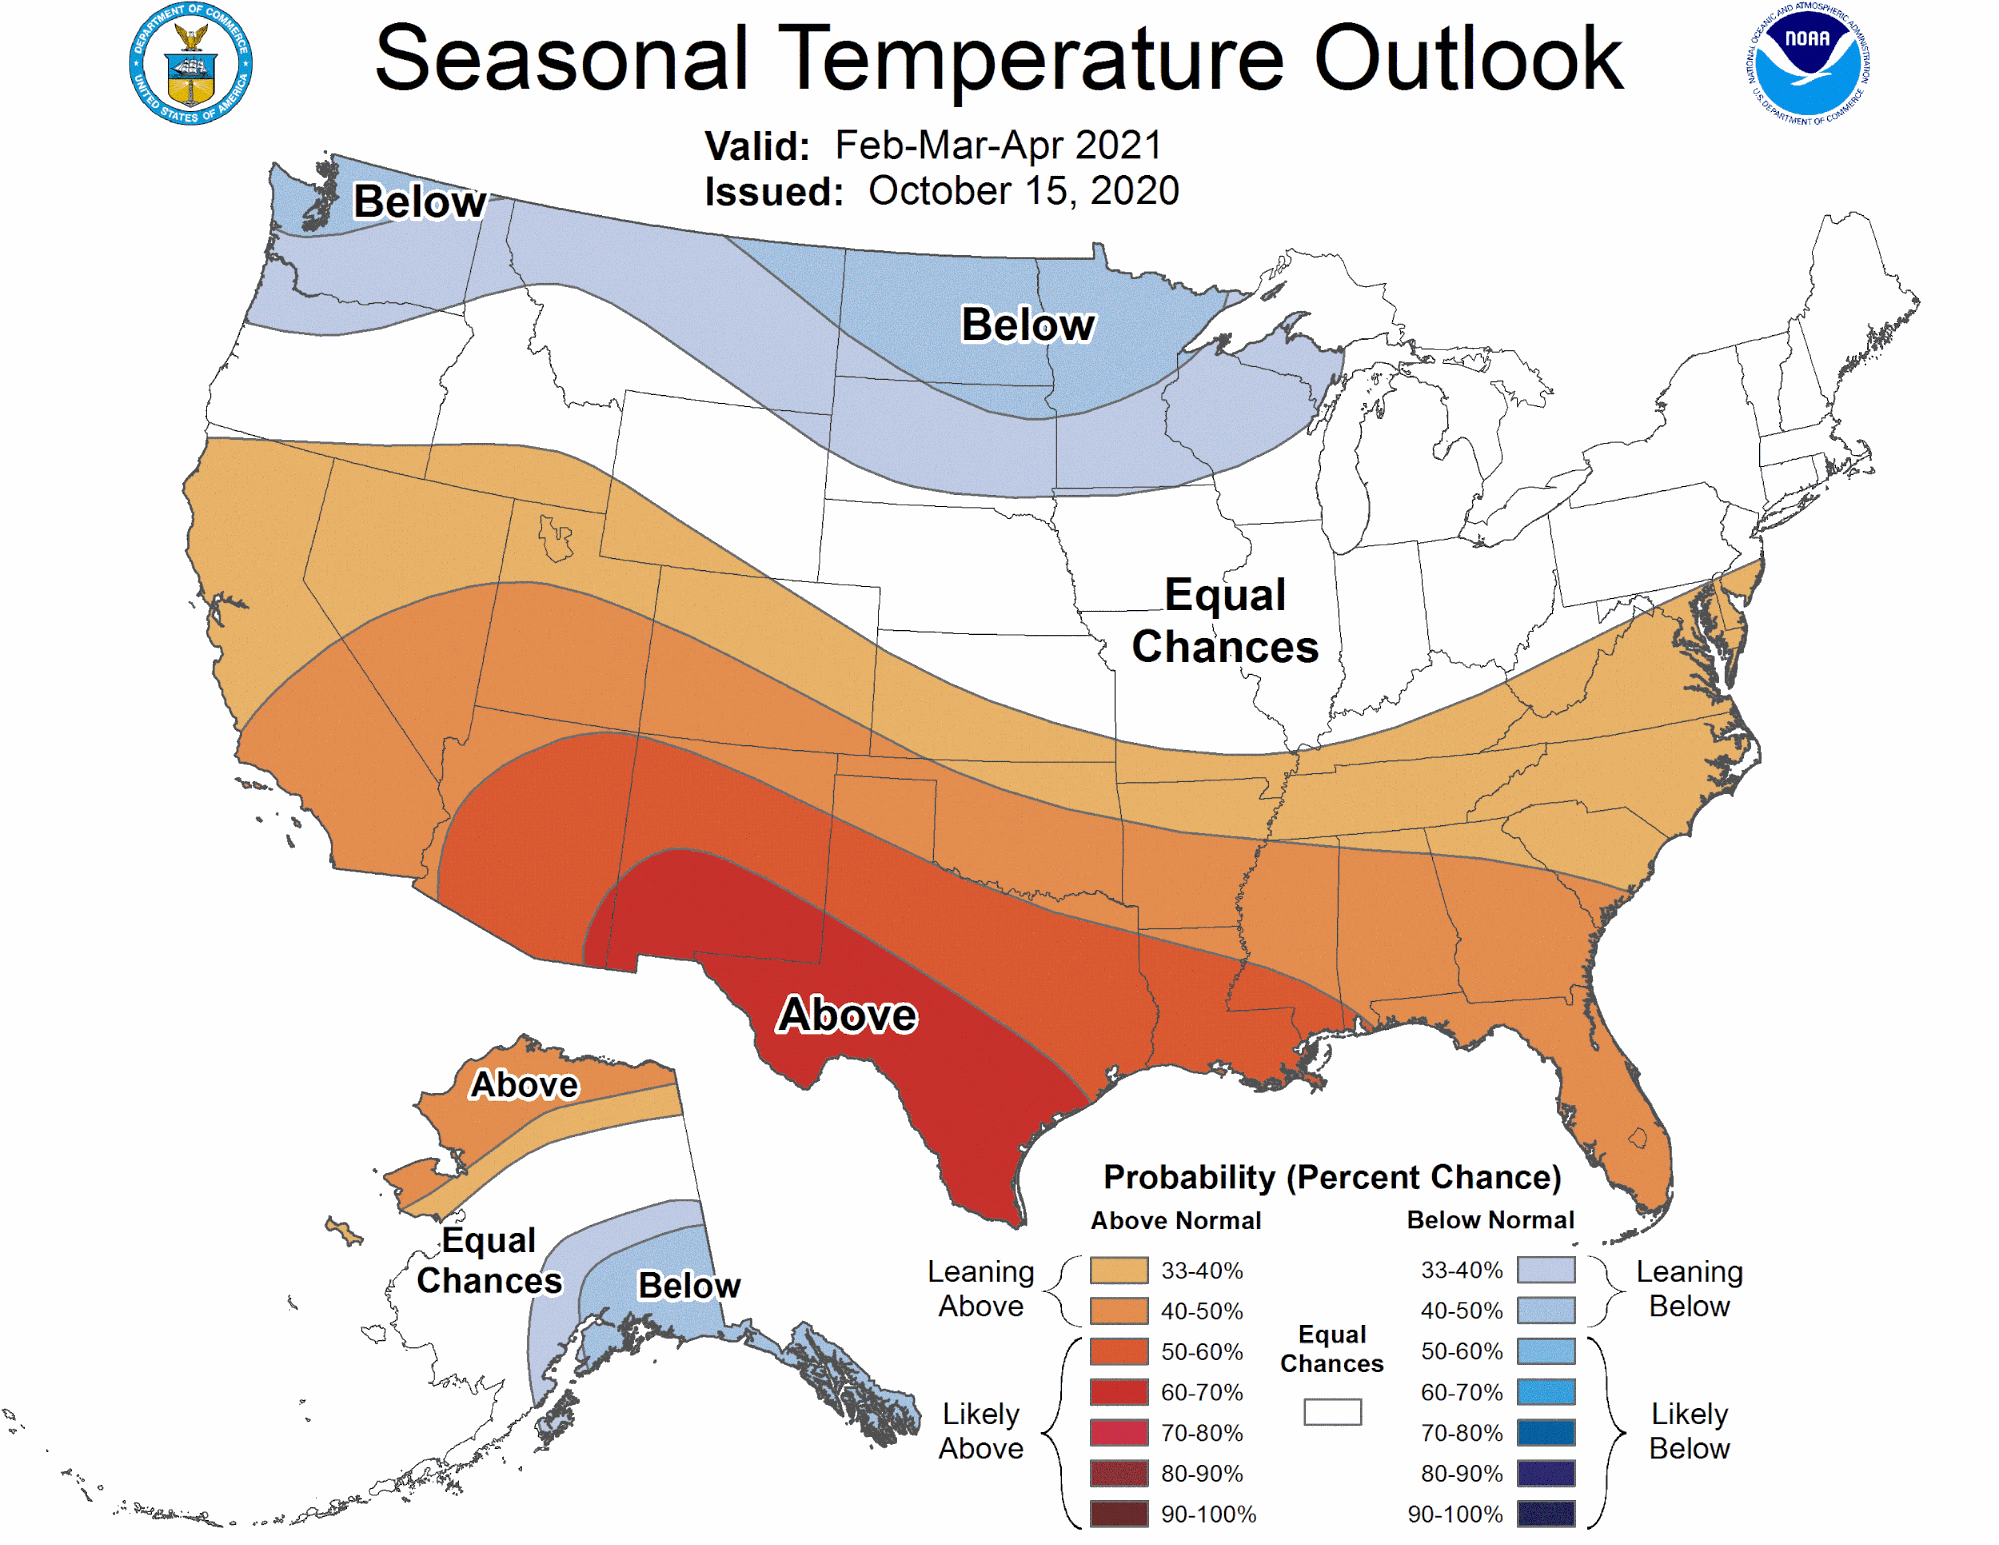 sample temperature map shows areas of above- and below-normal 3-month seasonal average temperatures, with some areas labeled “EC” or equal chances - where there is  no tilt in the odds towards either an above-, near- or below-average outcome. The new maps include a more comprehensive legend to better explain the different colors and probabilities. 